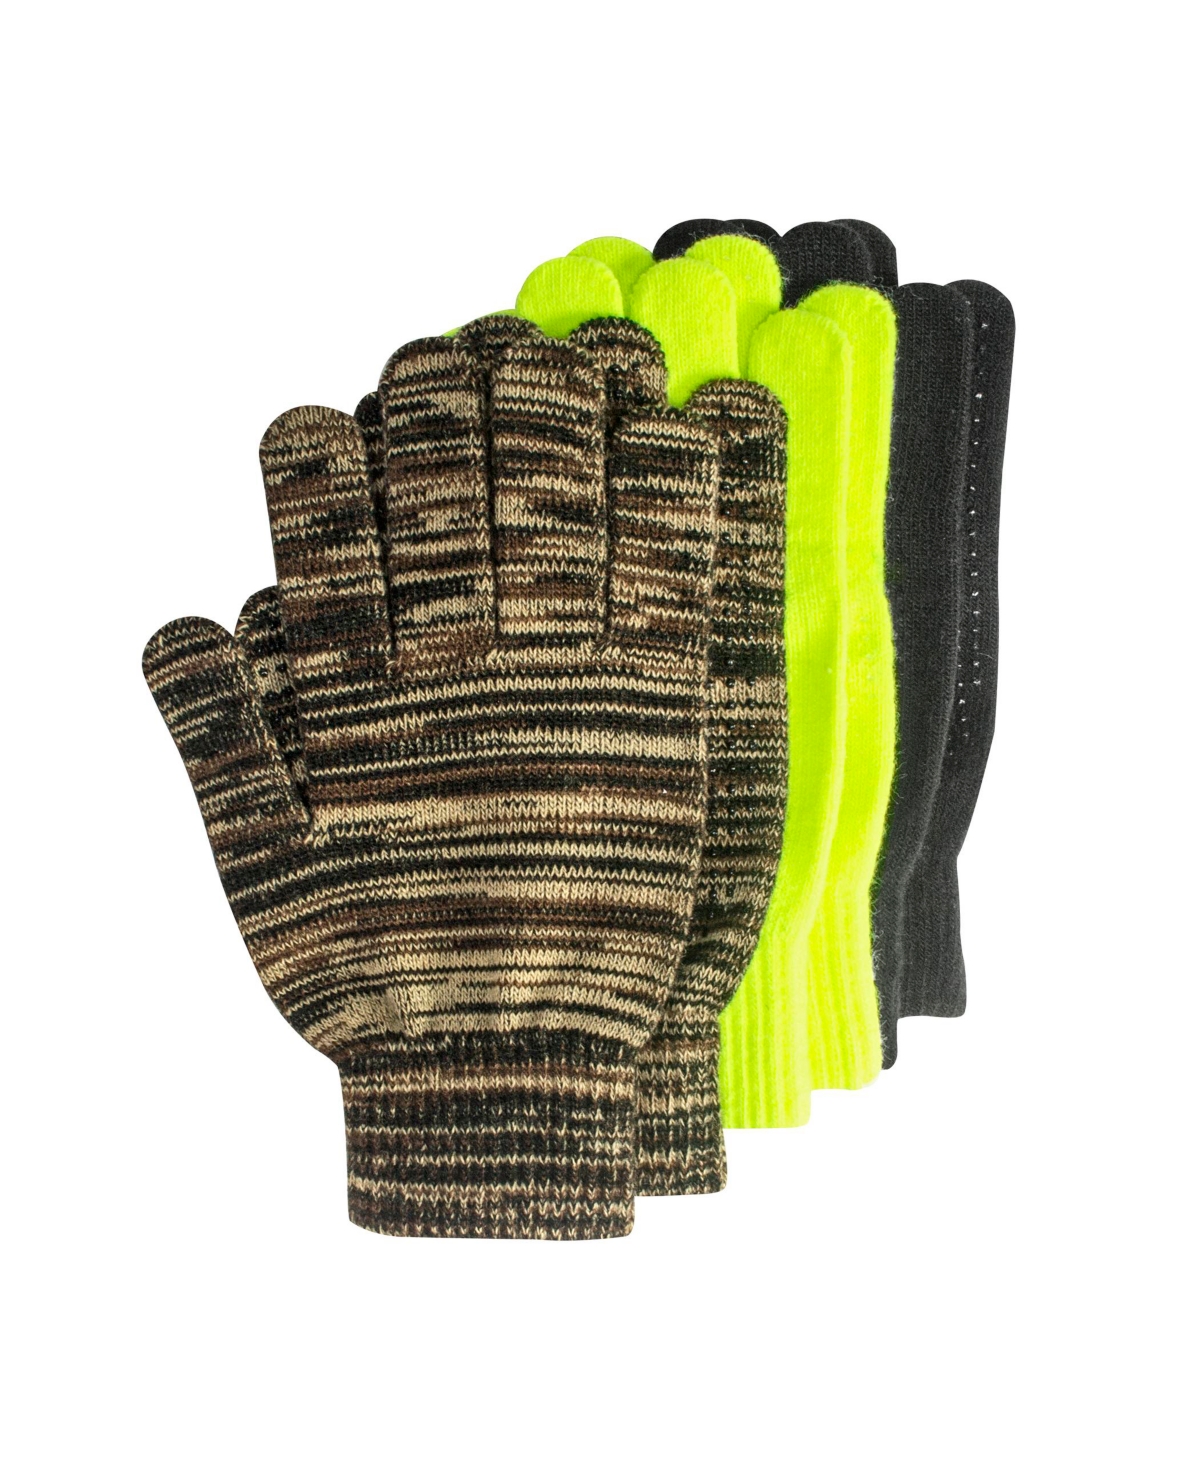 Men's Unisex 3-Pair Pack Grip Dot Assorted Gloves, Assorted, One Size - Assorted